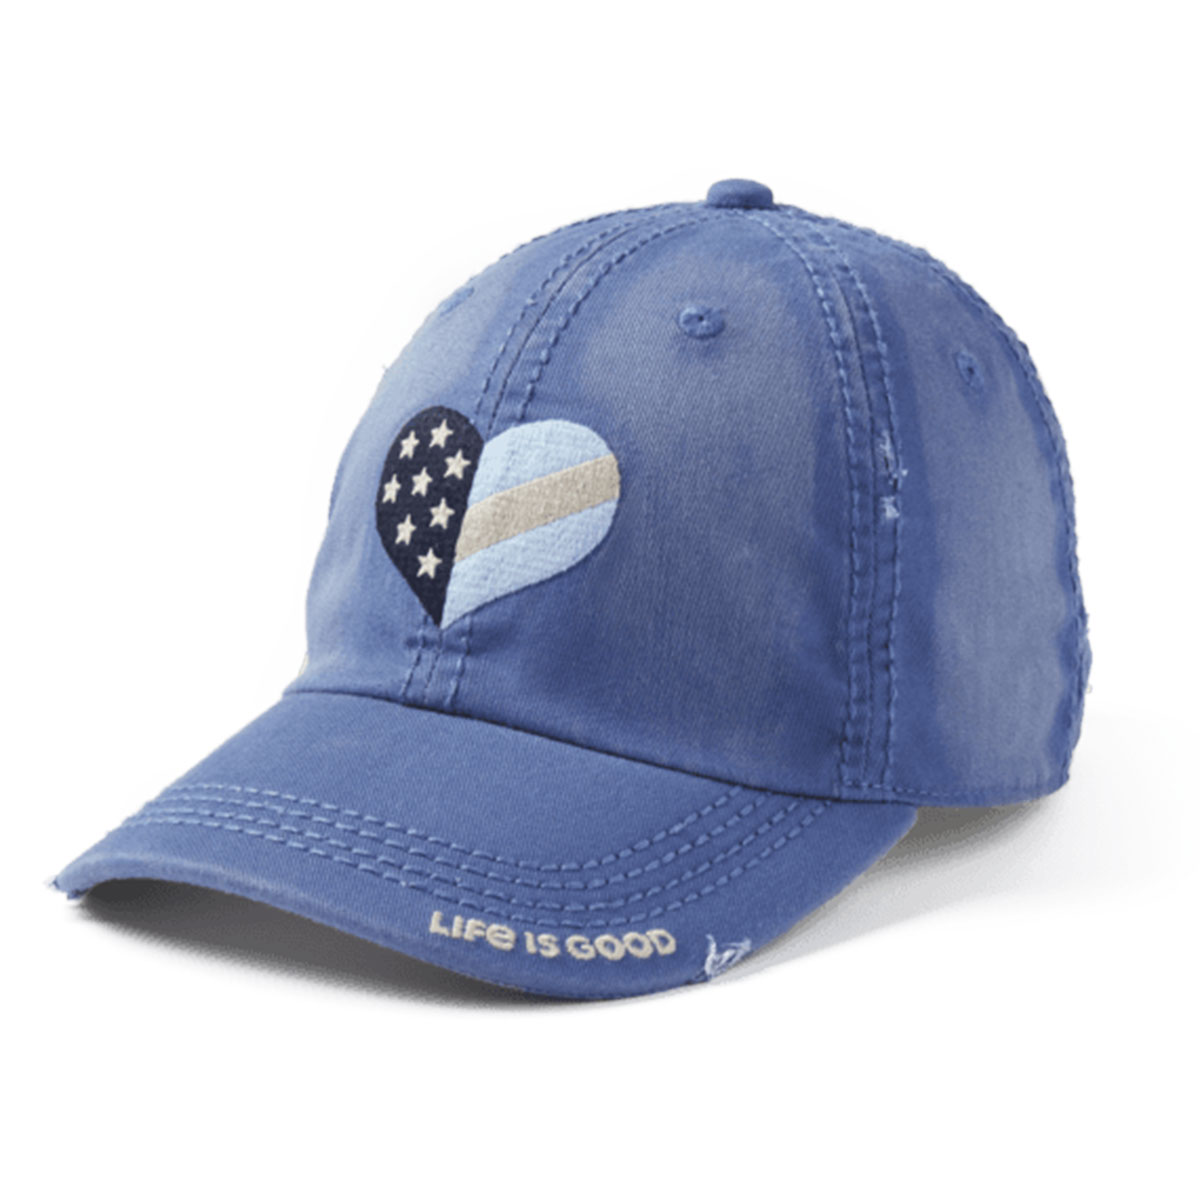 LIFE IS GOOD Primal Heart Chill Cap - Bob's Stores